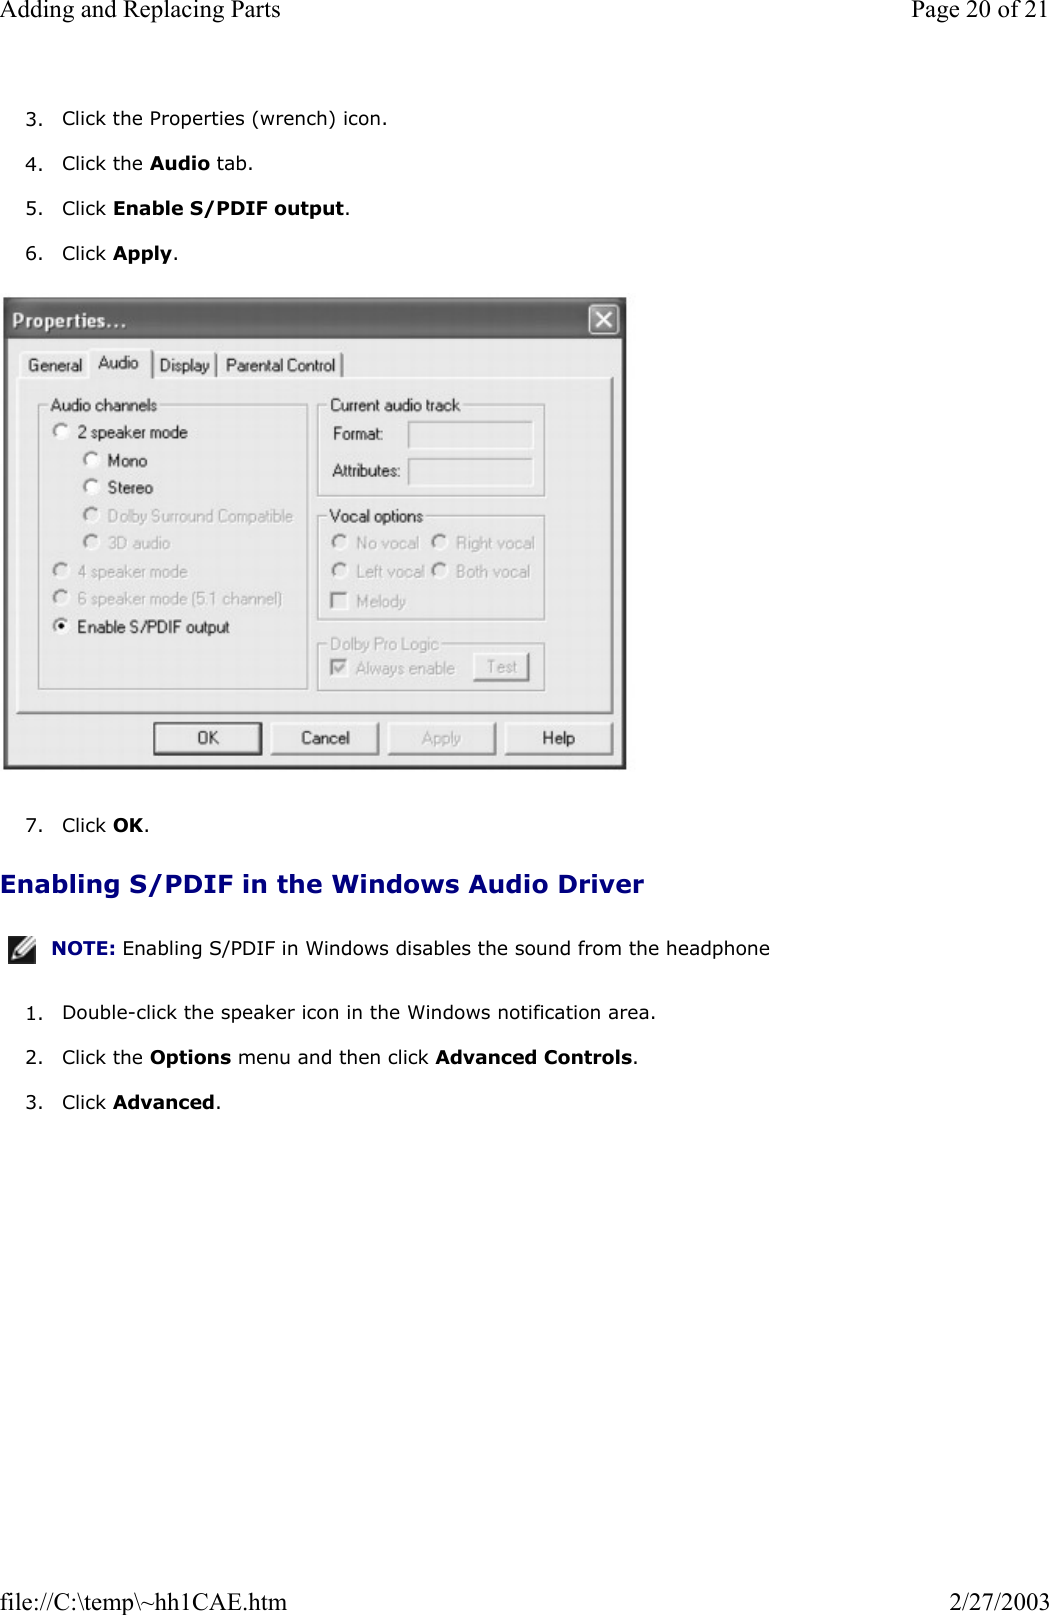 3. Click the Properties (wrench) icon.  4. Click the Audio tab.  5. Click Enable S/PDIF output.  6. Click Apply.    7. Click OK.  Enabling S/PDIF in the Windows Audio Driver 1. Double-click the speaker icon in the Windows notification area.  2. Click the Options menu and then click Advanced Controls.  3. Click Advanced.  NOTE: Enabling S/PDIF in Windows disables the sound from the headphone Page 20 of 21Adding and Replacing Parts2/27/2003file://C:\temp\~hh1CAE.htm